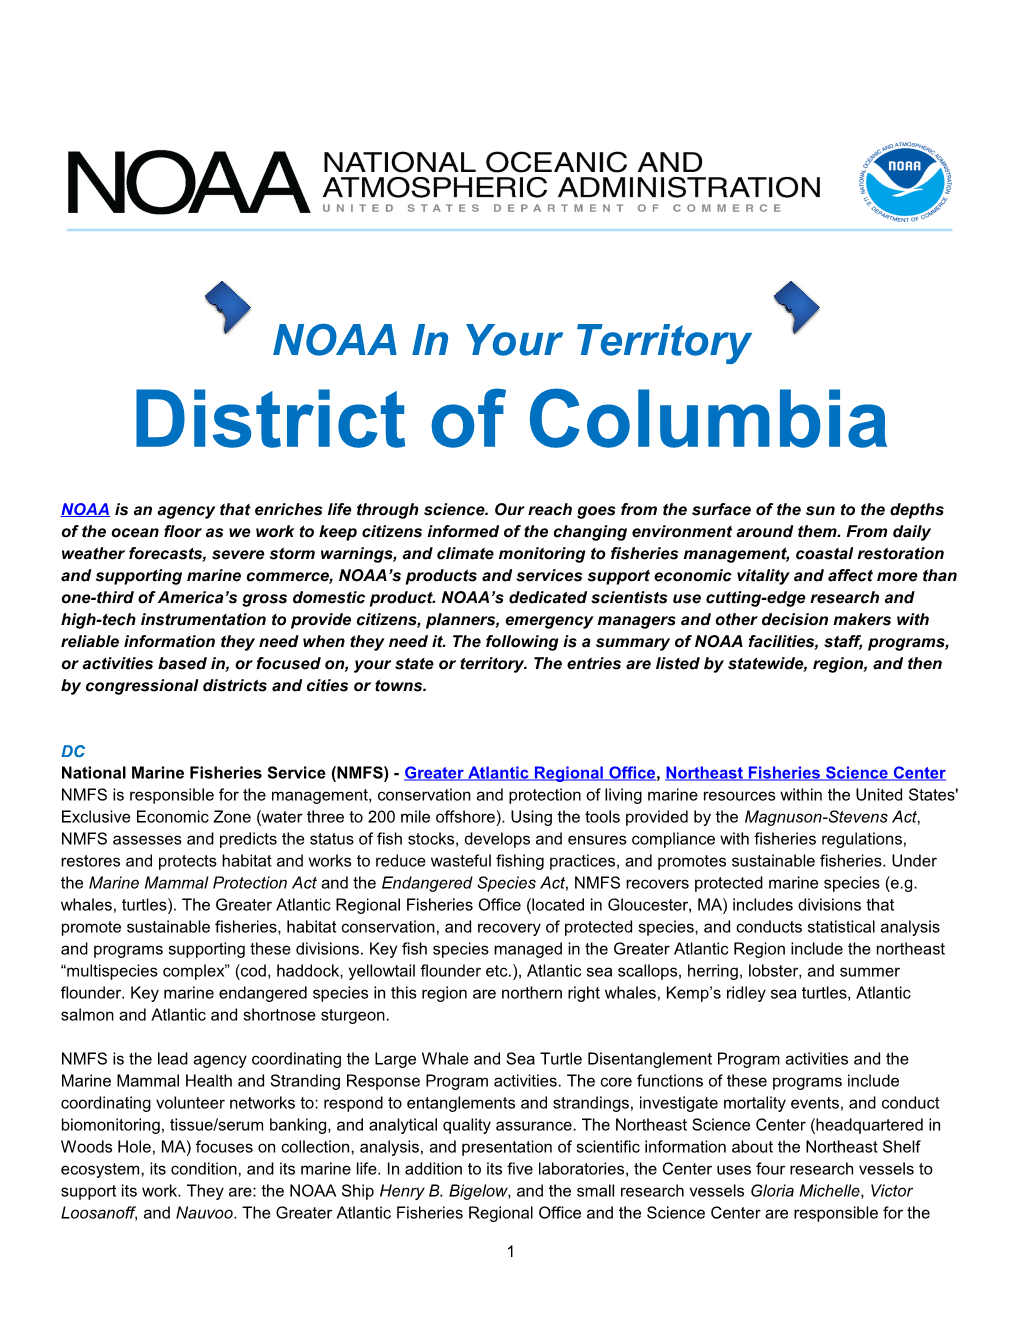 NOAA in Your State - Washington DC